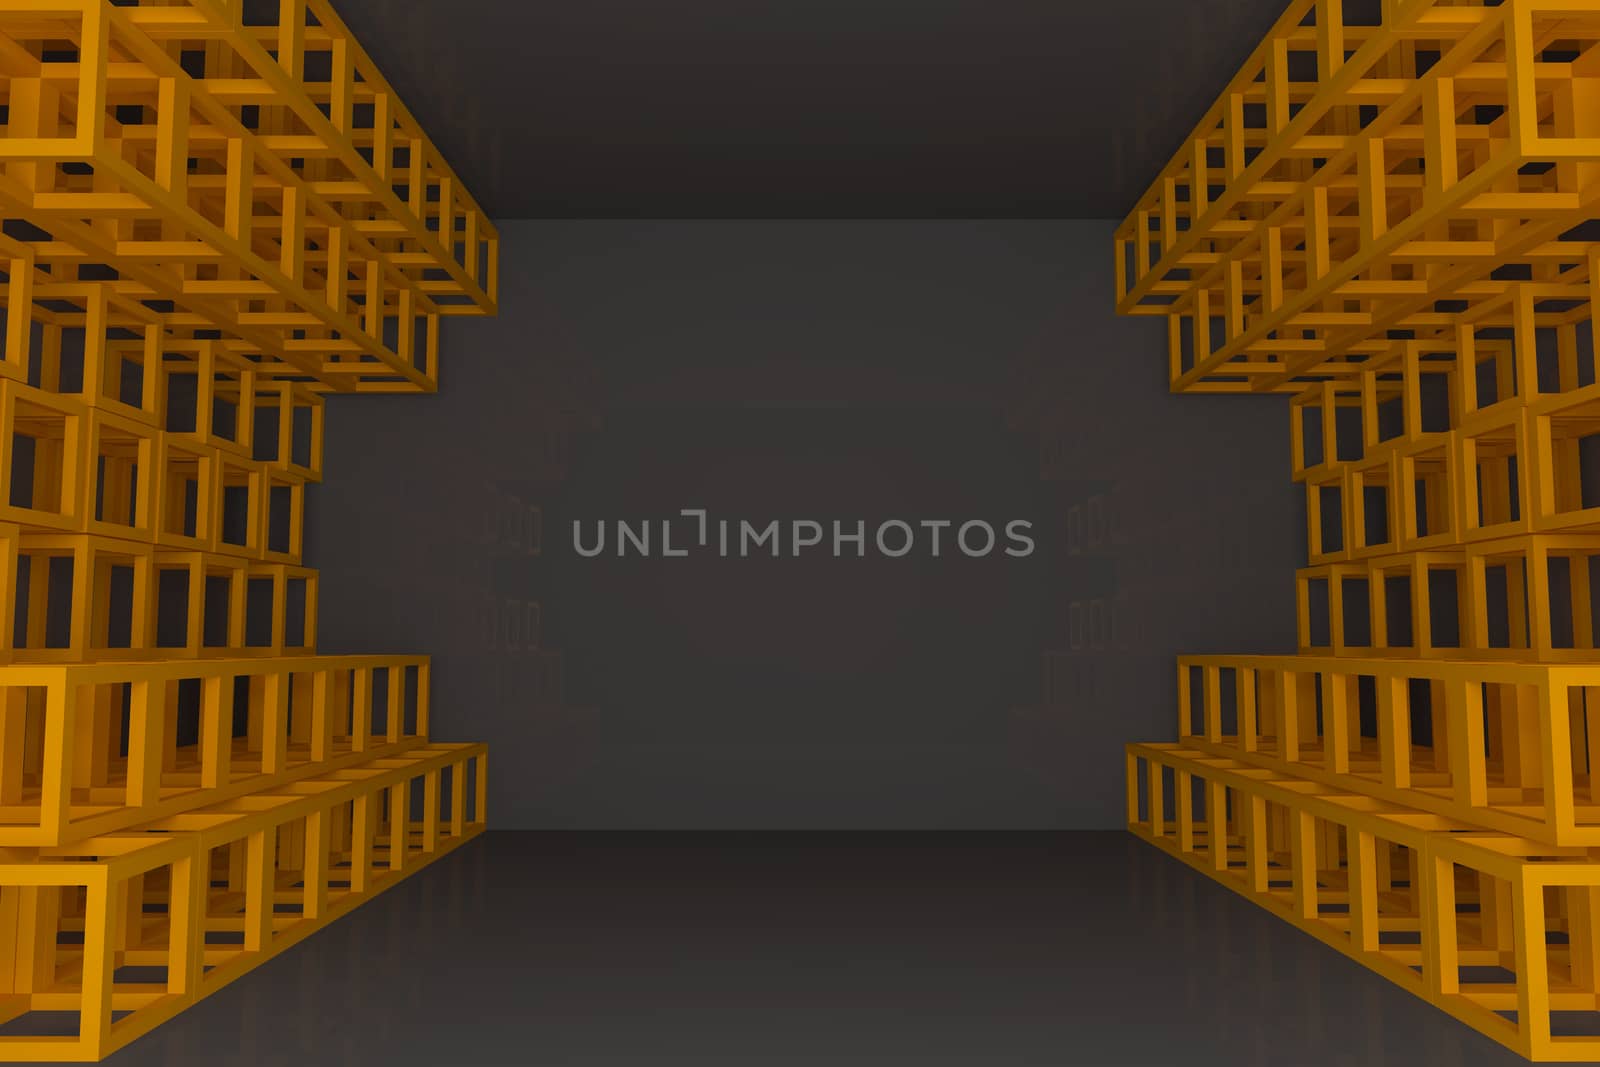 Abstract orange square truss wall with empty room